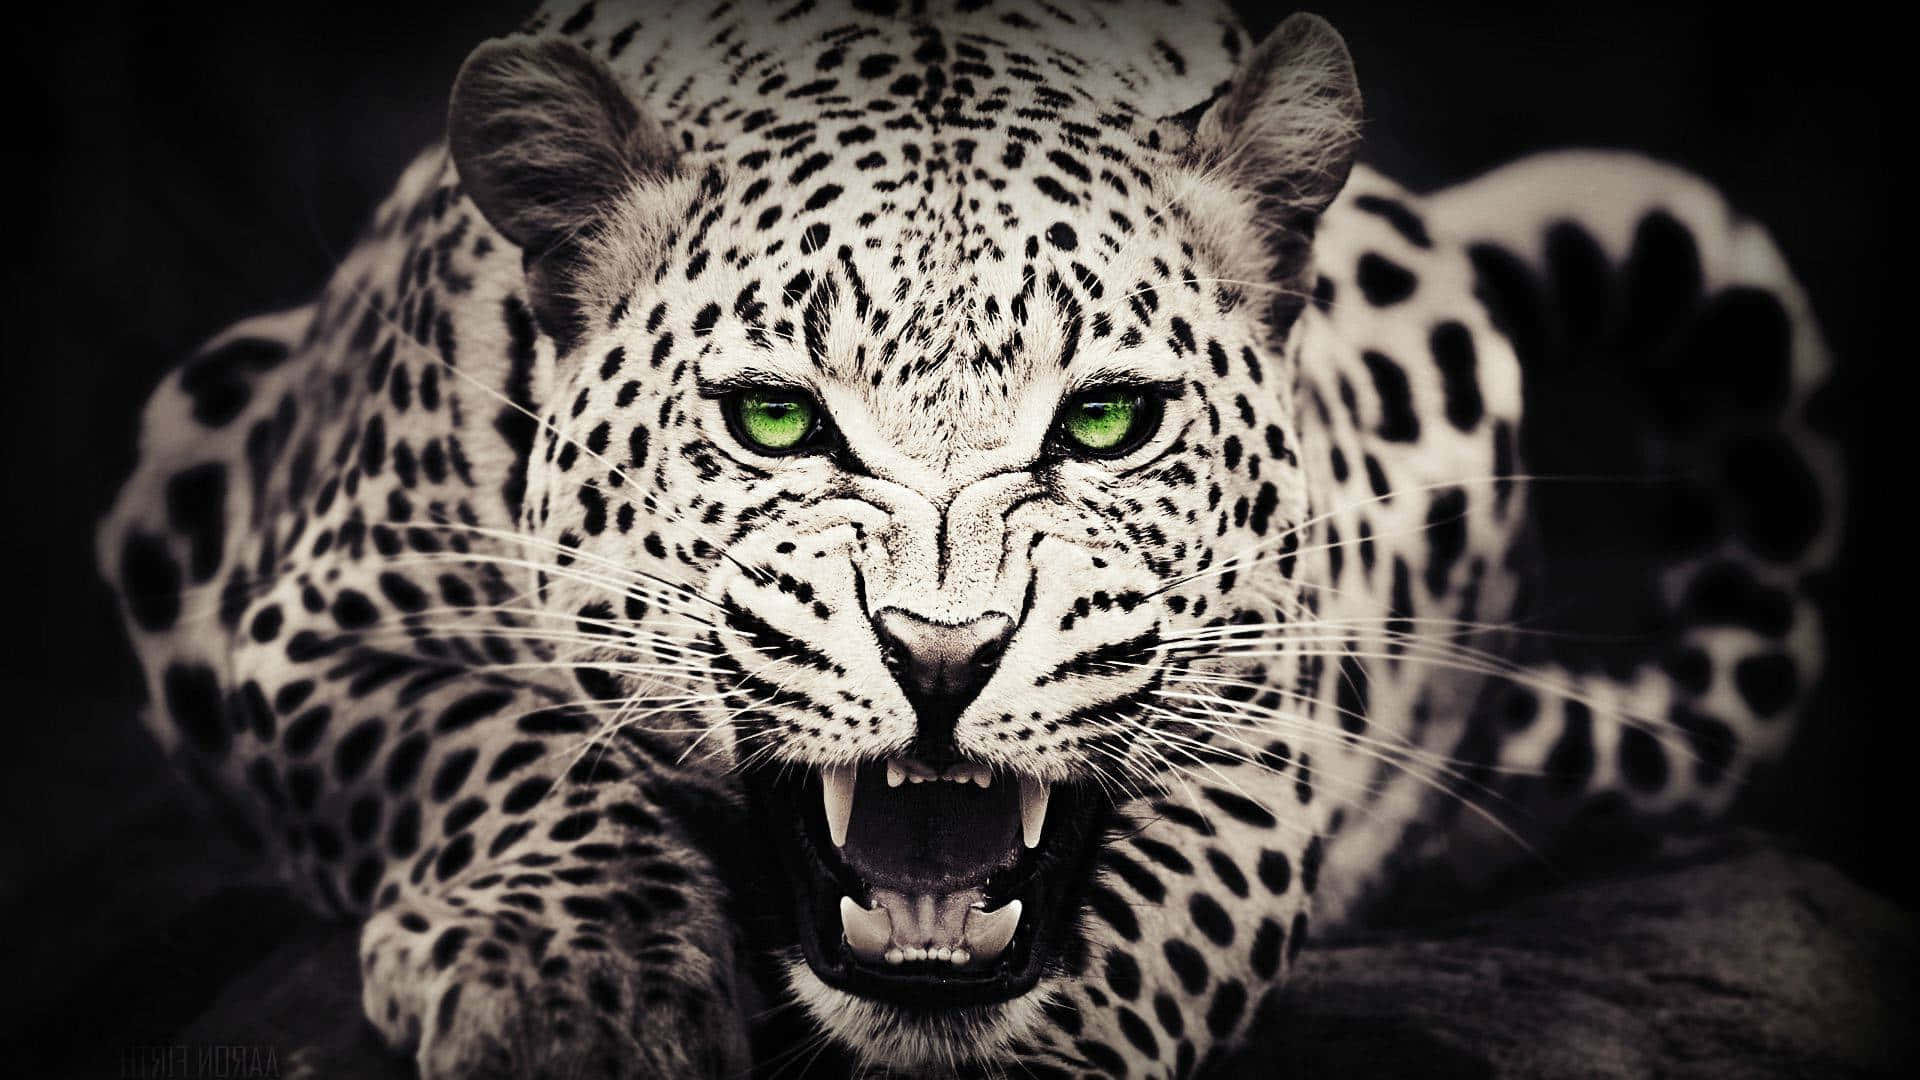 Sepia Aesthetic Leopard With Green Eyes Wallpaper